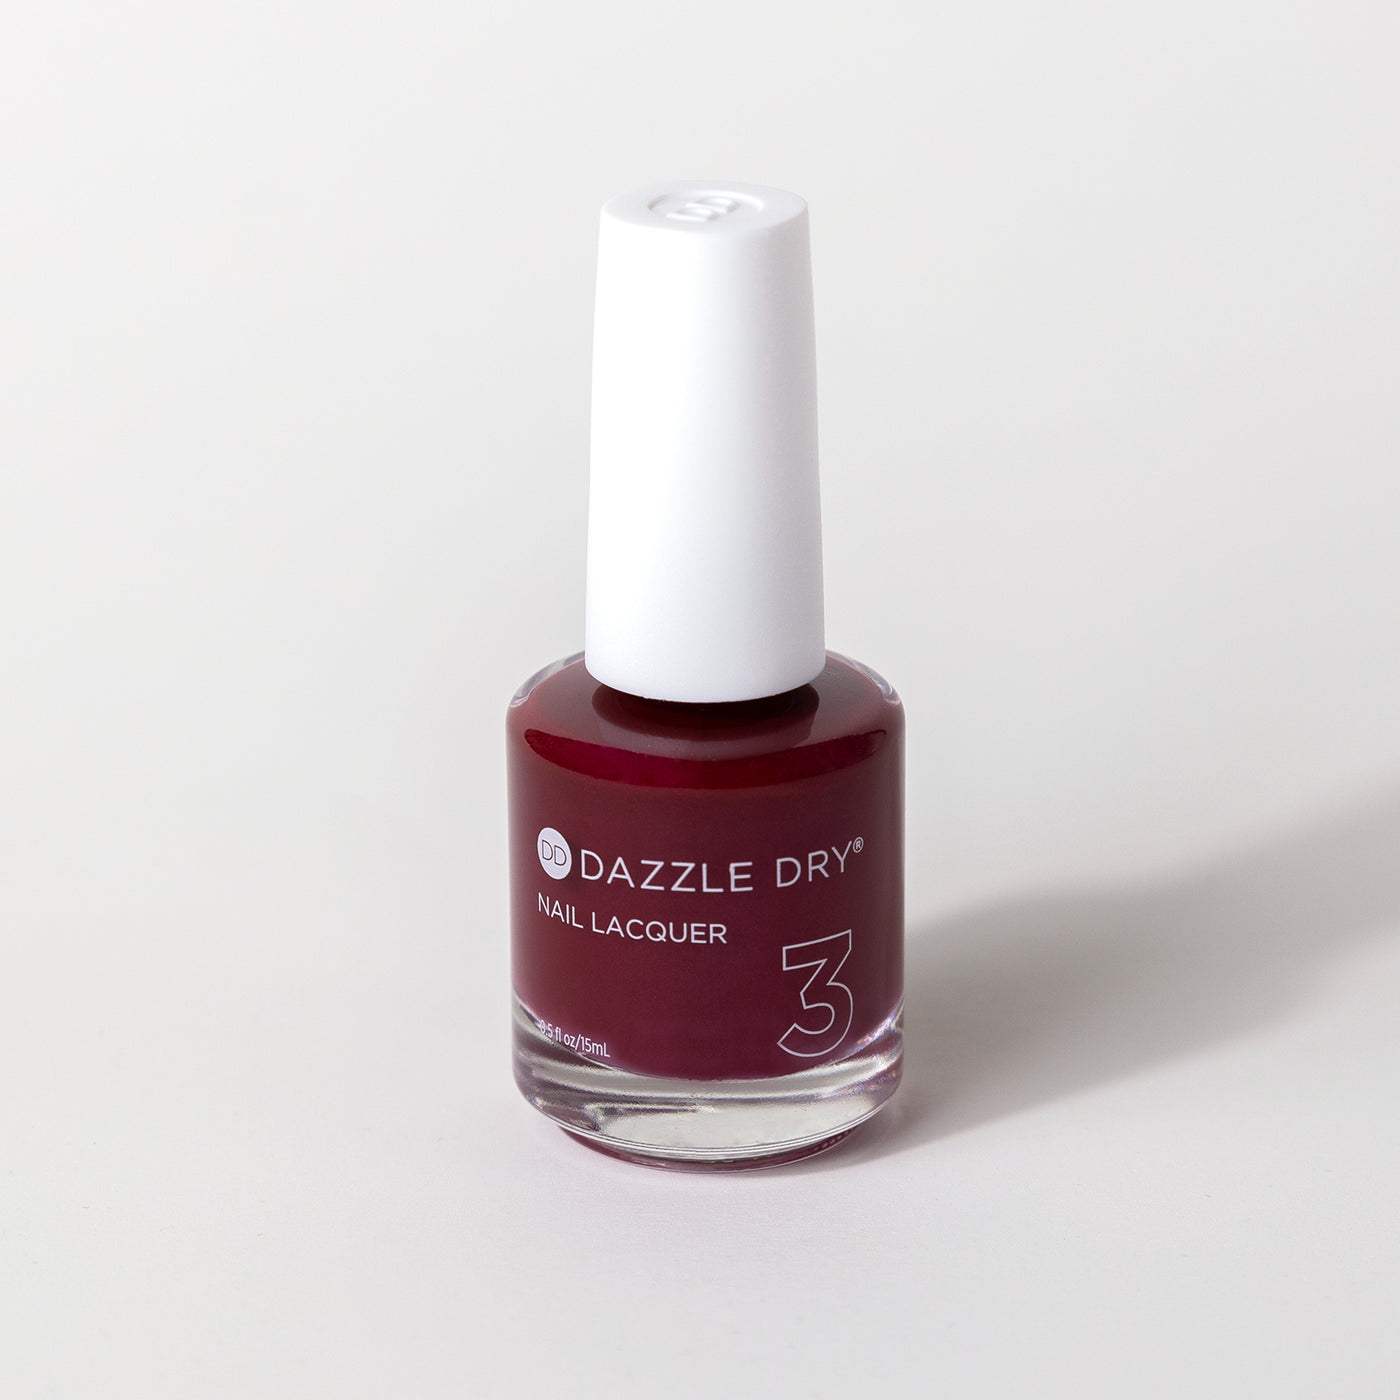 Forever Love – Nail Lacquer by Dazzle Dry